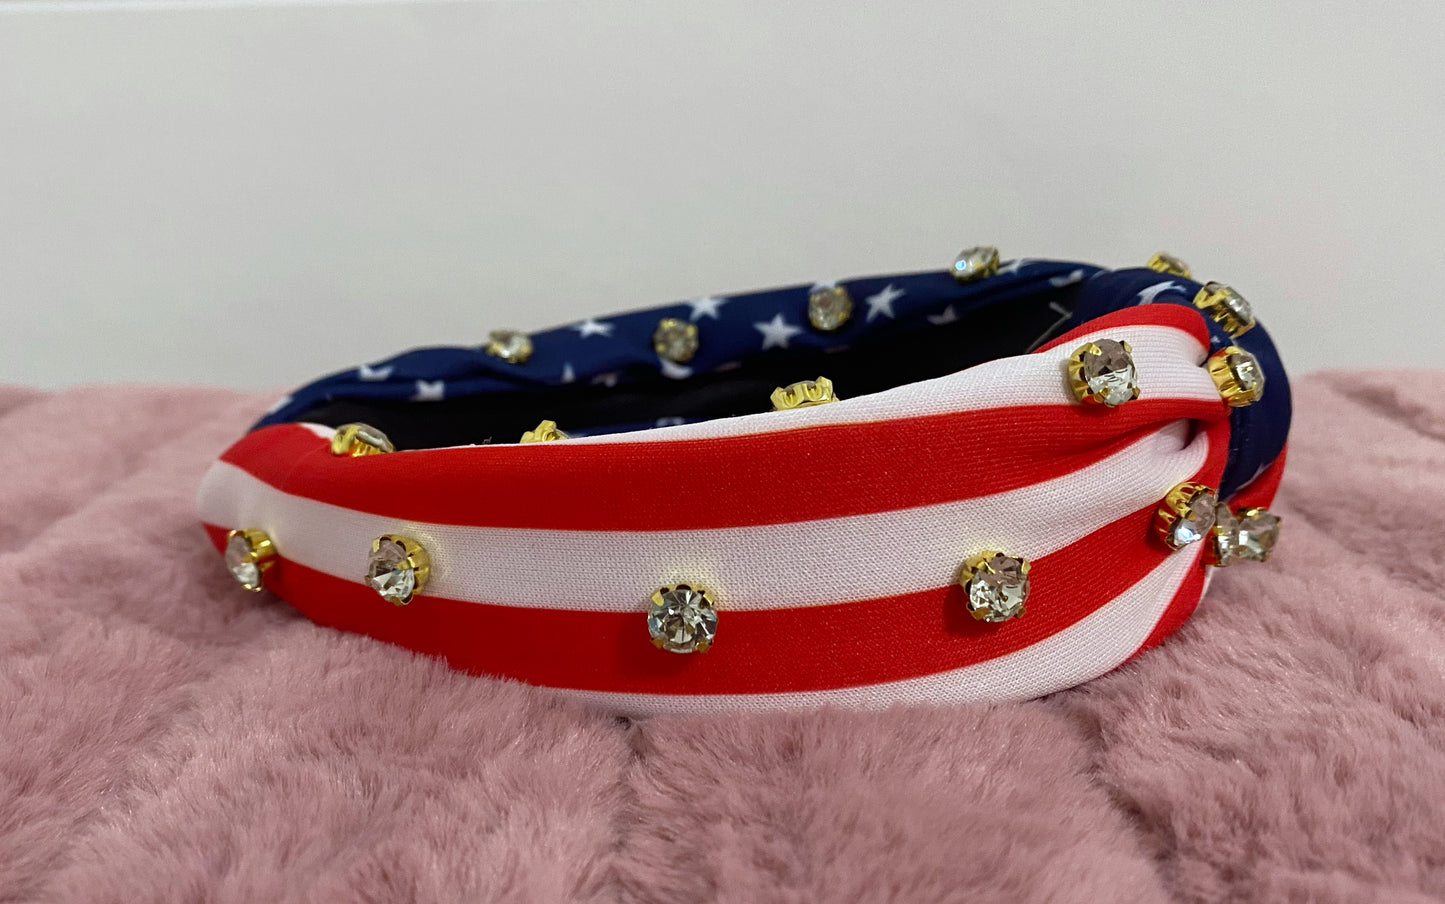 Red white and blue headband